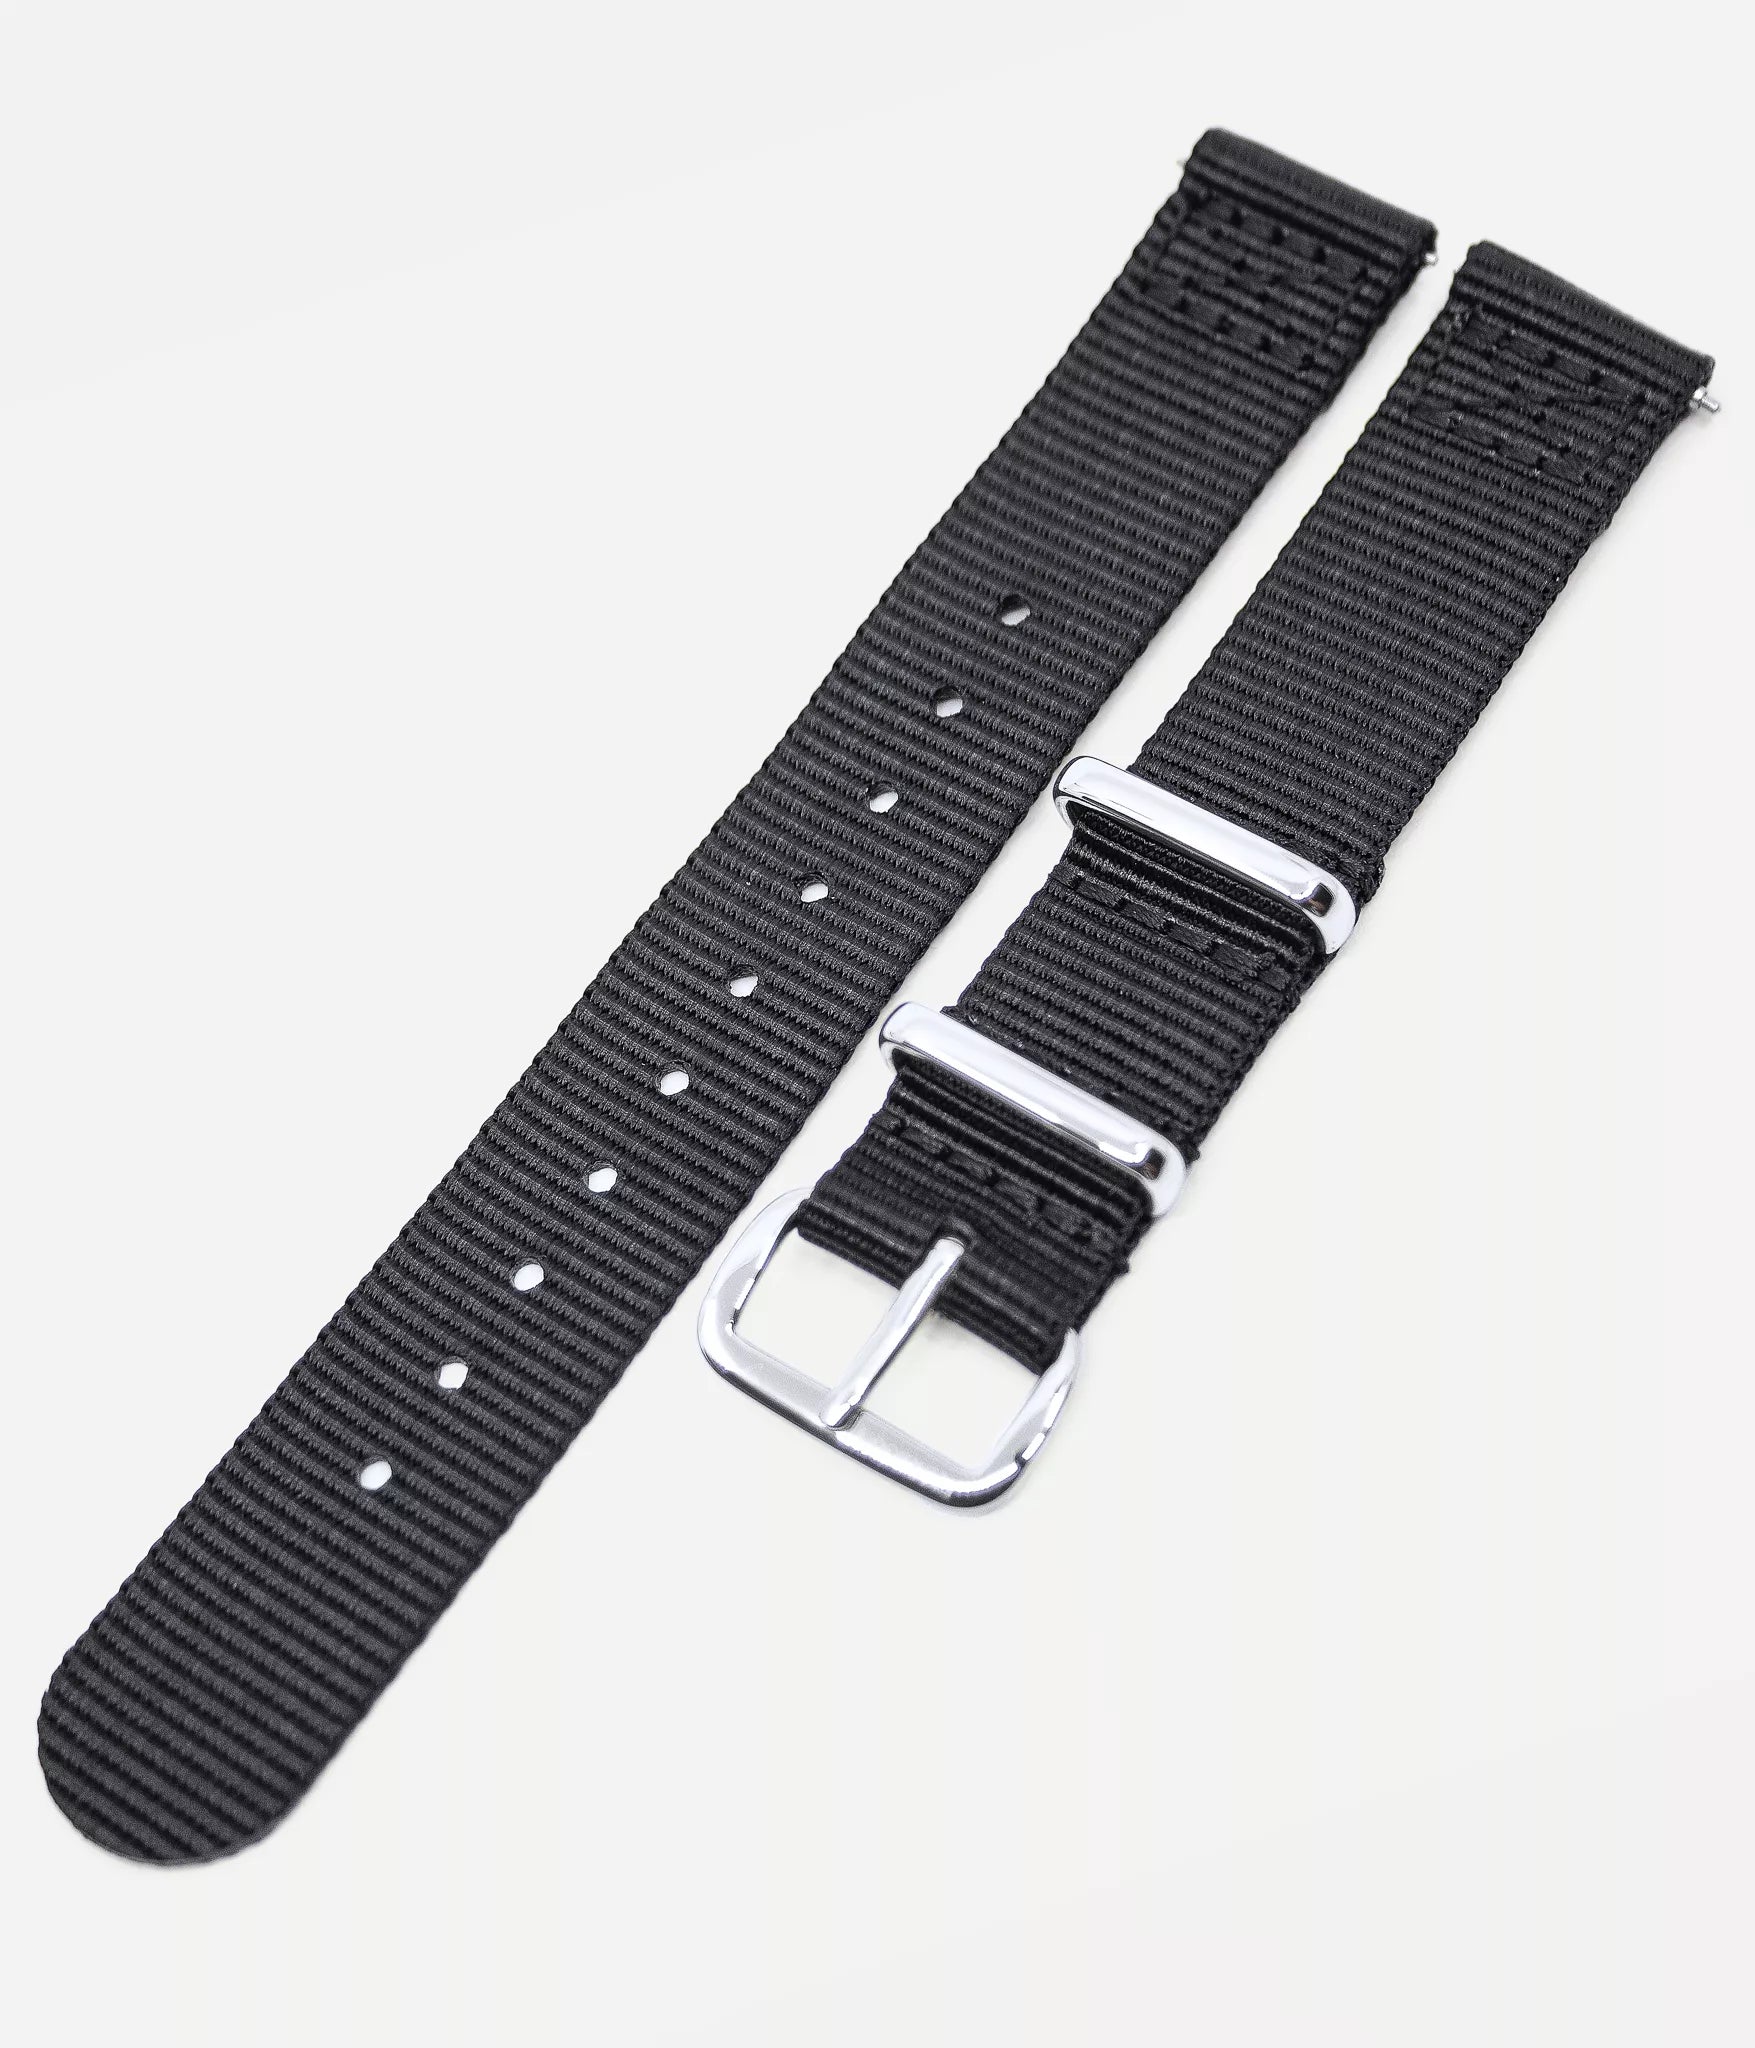 Watch strap shot - Fjordson watch with white dial and black NATO nylon watch strap - Women's Watch - vegan & approved by PETA - Swiss made